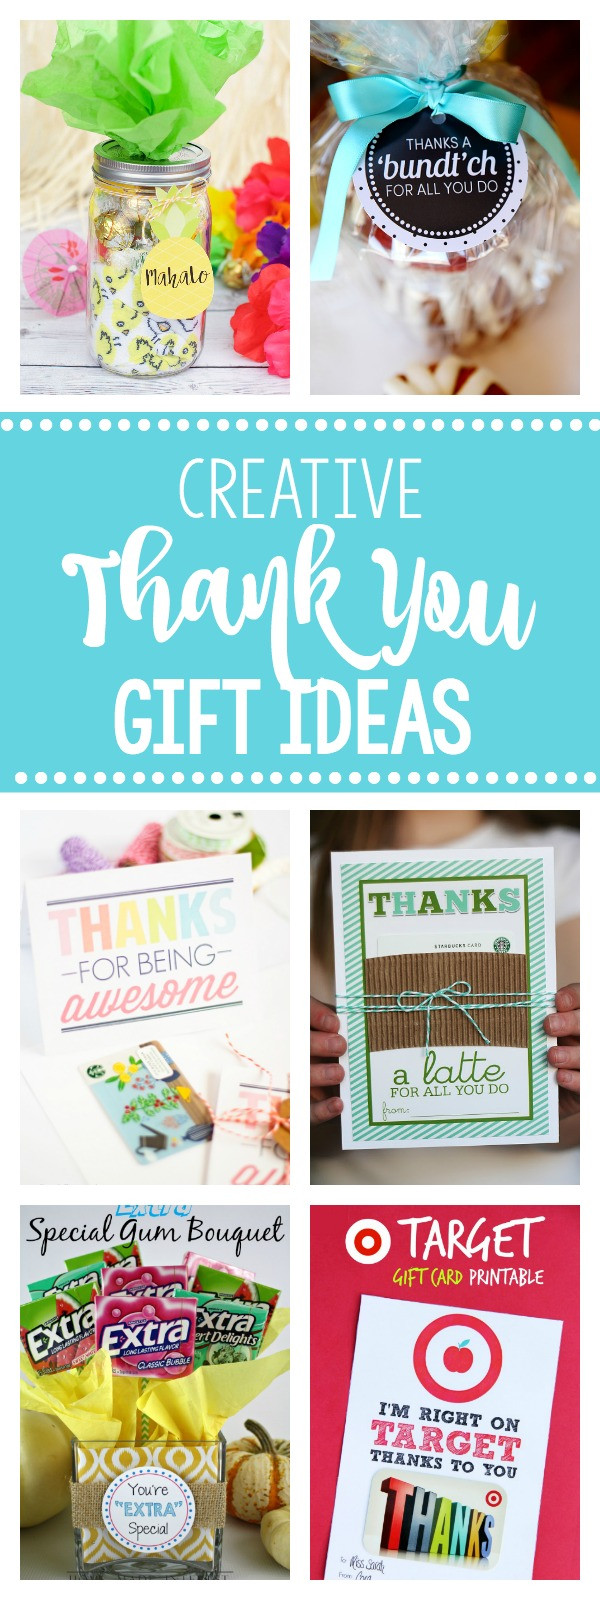 Coworker Thank You Gift Ideas
 25 Creative & Unique Thank You Gifts – Fun Squared